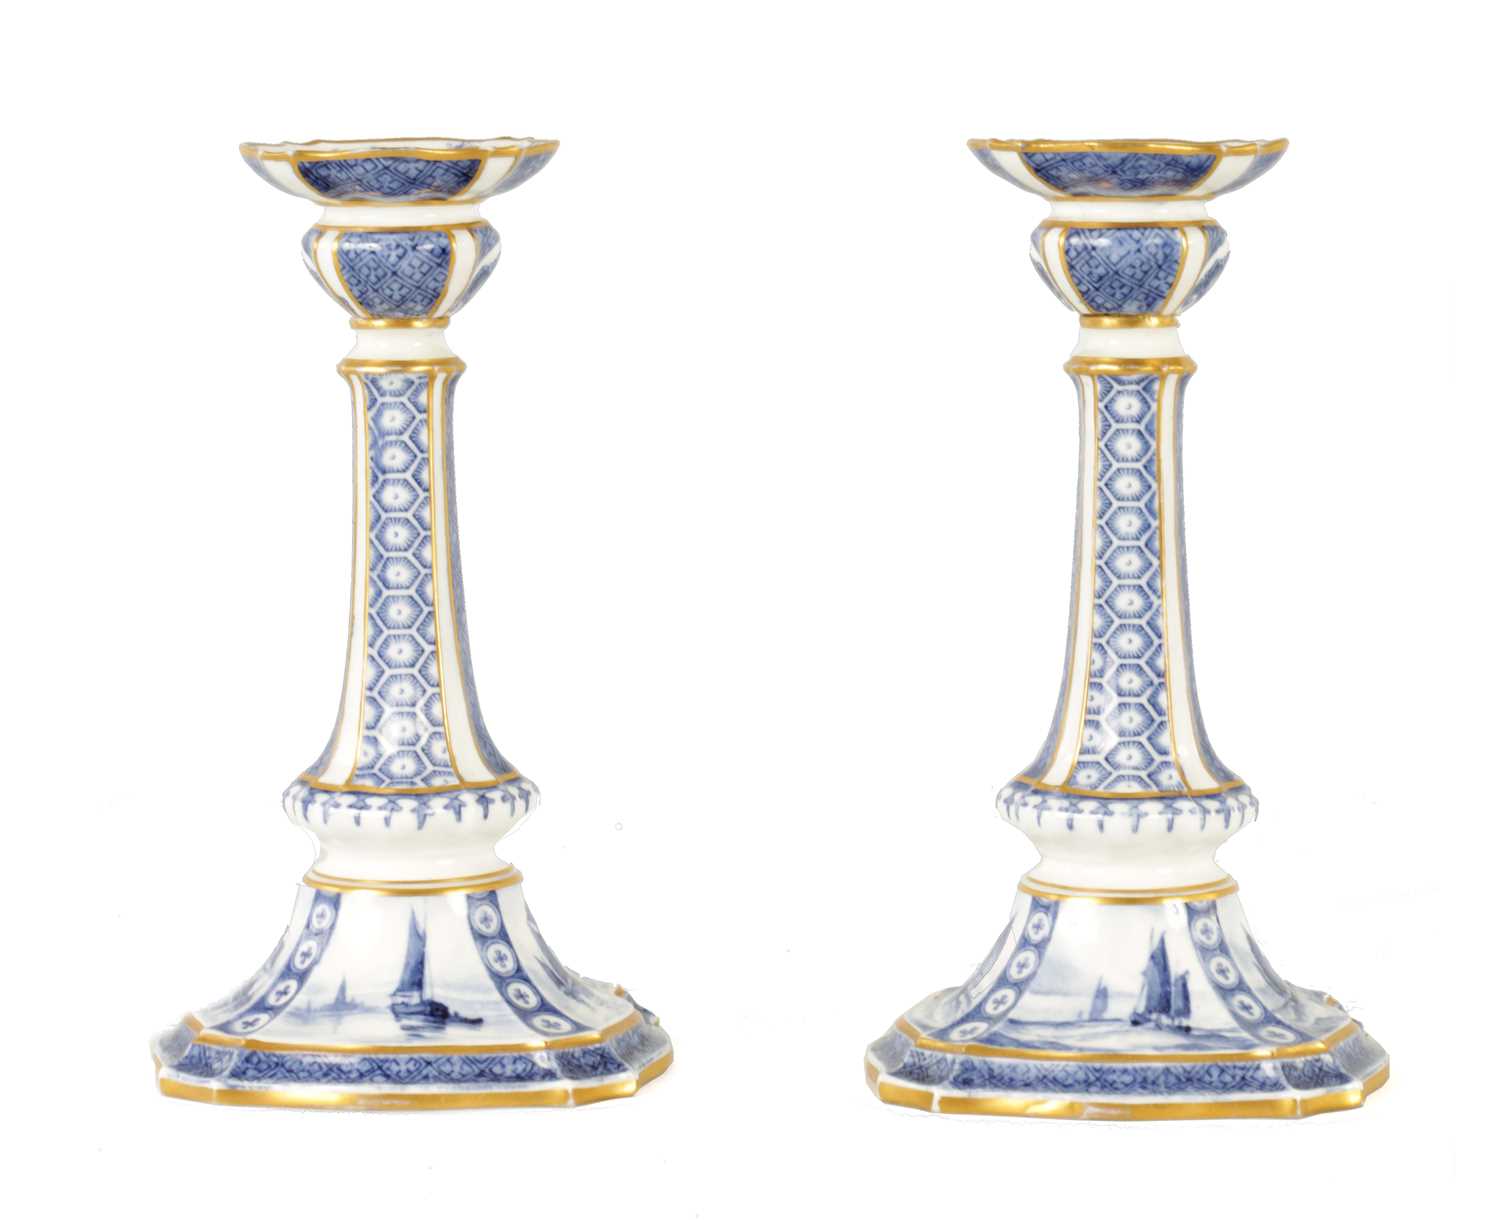 Lot 73 - A RARE PAIR OF ROYAL CROWN DERBY BLUE AND WHITE CANDLESTICKS